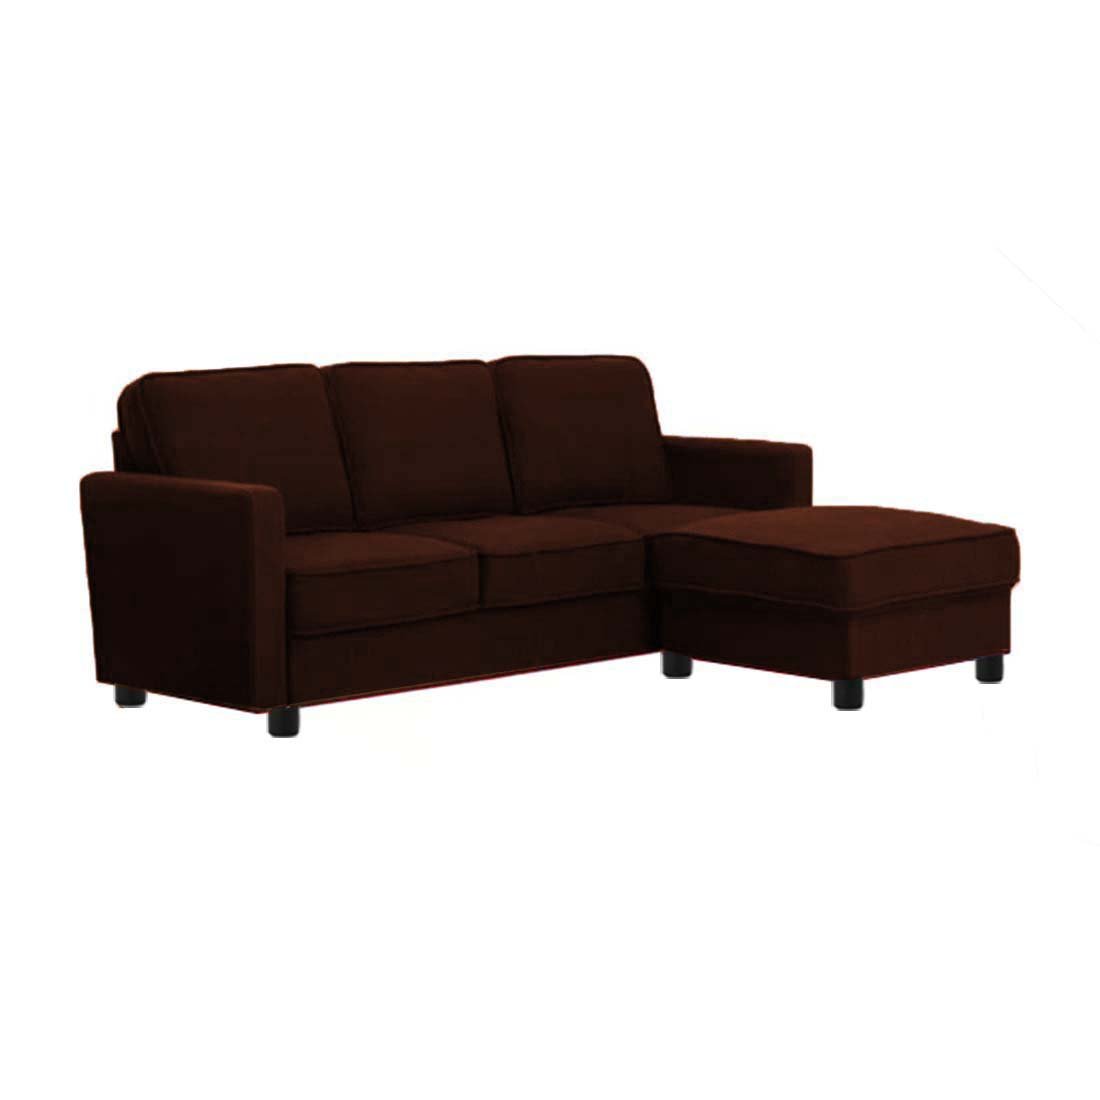 Torque India Federica 3 Seater Fabric Sofa With Ottoman For Living Room - Torque India